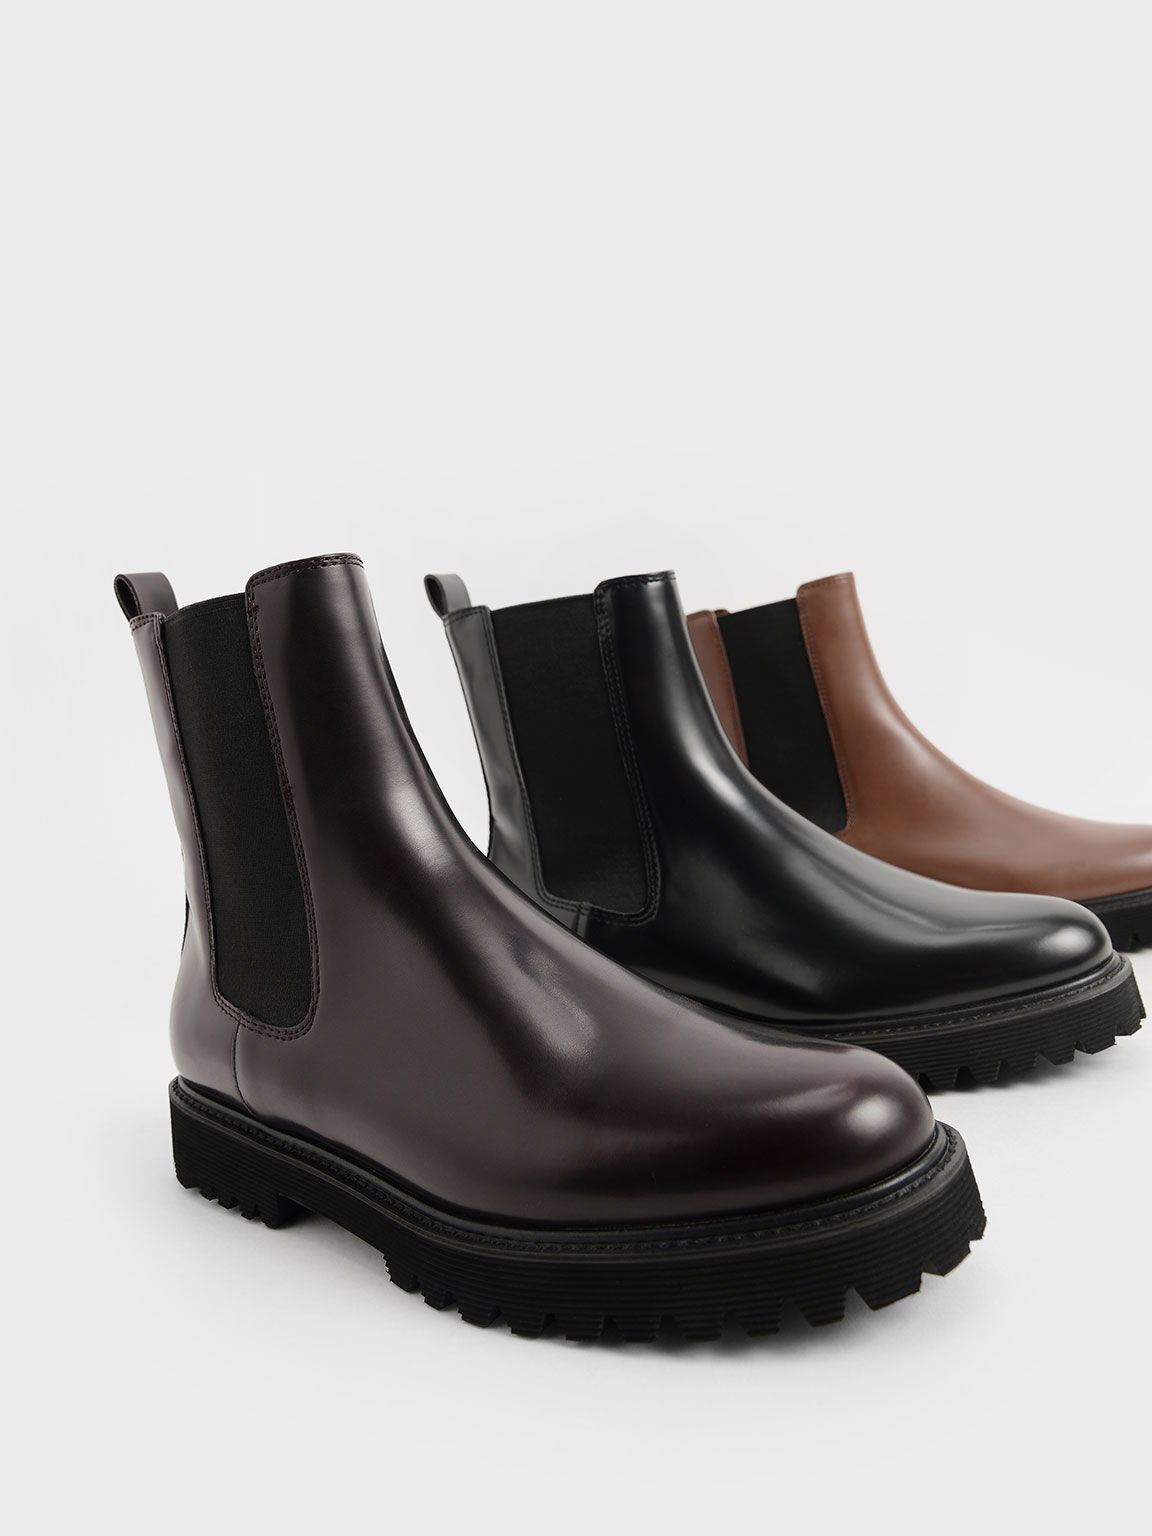 Black Cleated Sole Chelsea Boots - CHARLES & KEITH KH